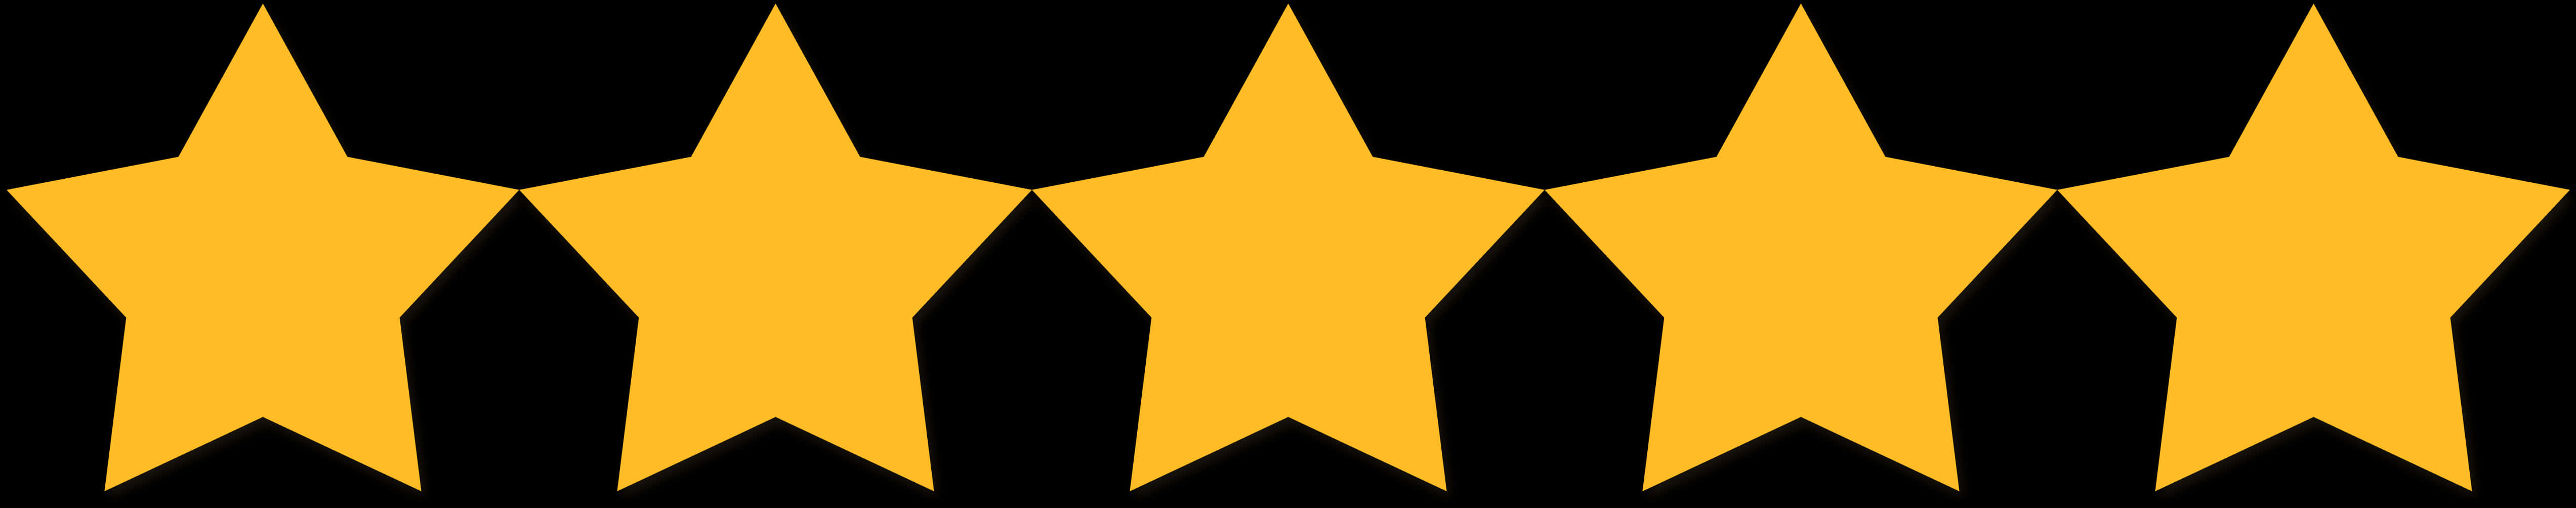 Five Star Rating Golden Graphic PNG